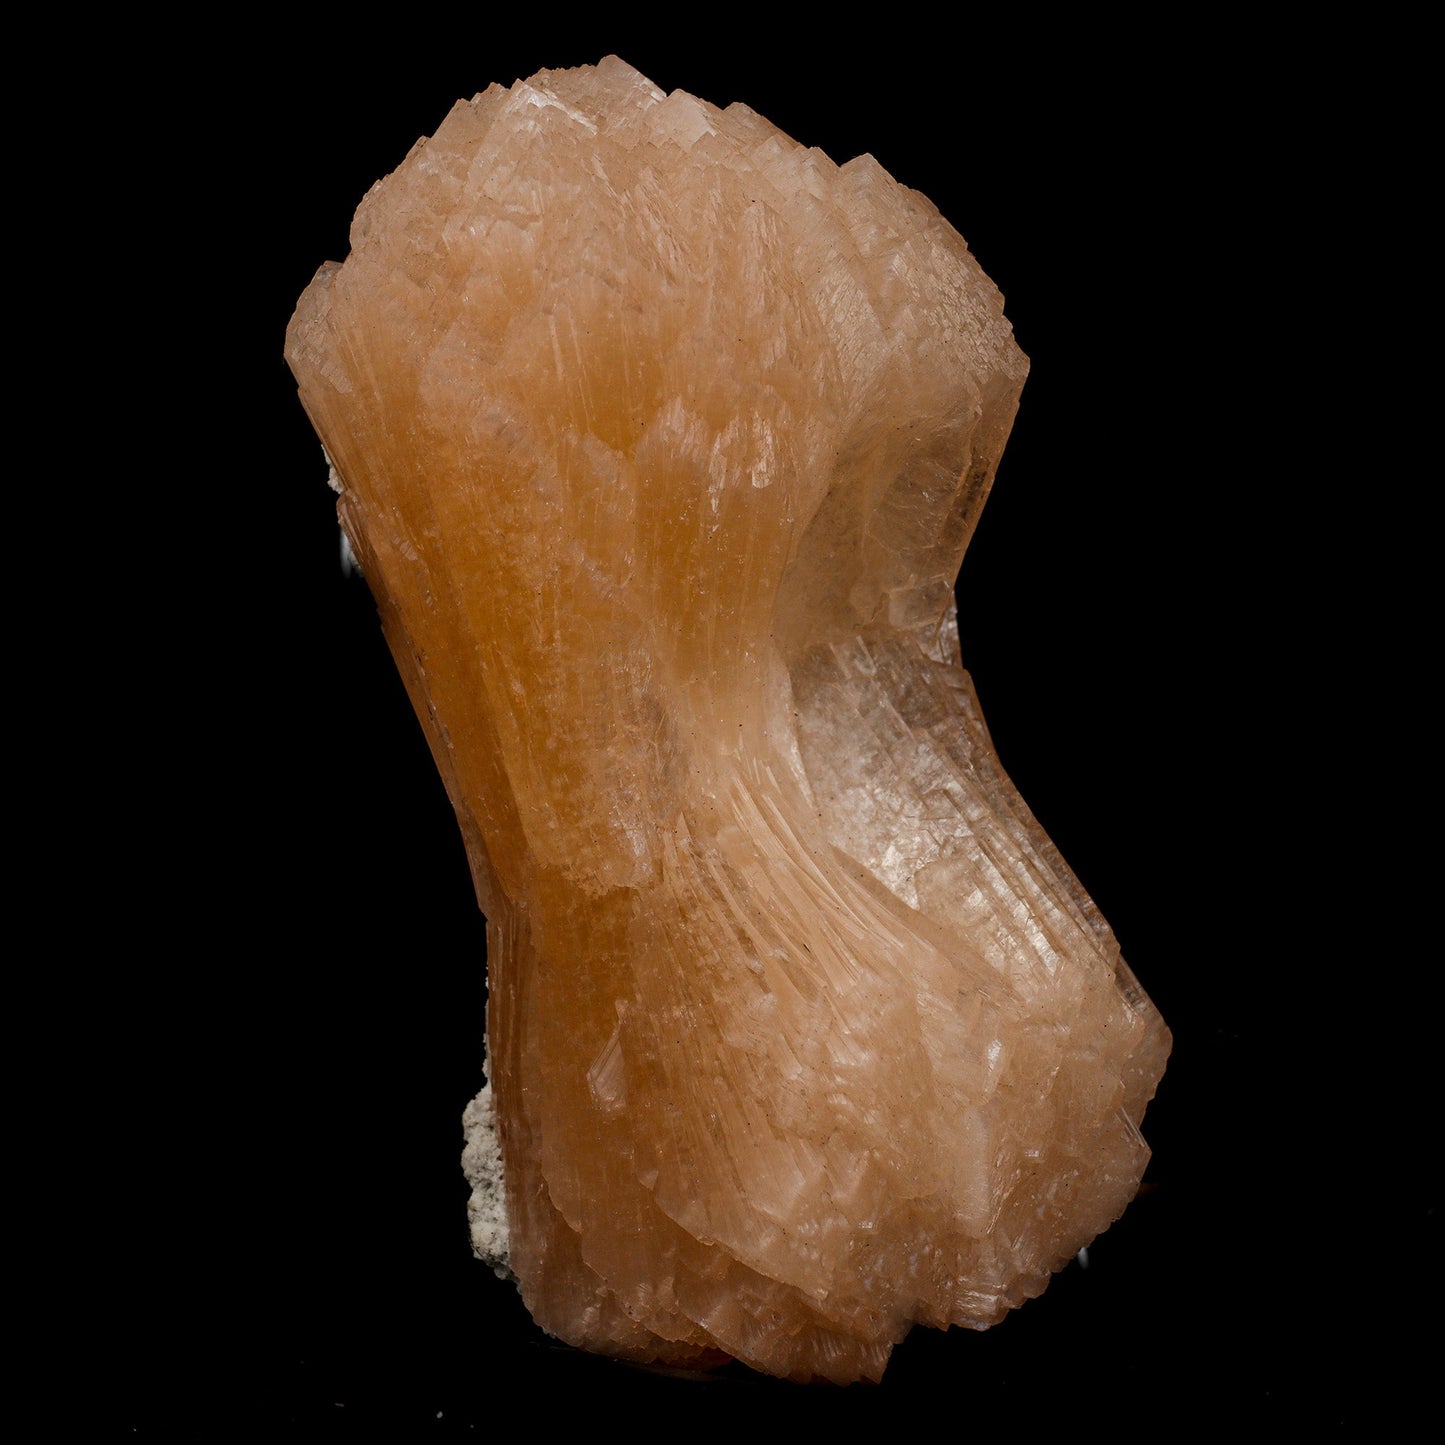 Stilbite Bow Shape Natural Mineral Specimen # B 5097  https://www.superbminerals.us/products/stilbite-bow-shape-natural-mineral-specimen-b-5097  Features: The best viewing angle for this specimen shows a 3-dimensional upright stilbite "bow tie," with a pastel salmon color and great luster and translucence. The matrix is a thin veneer of Heulandite. Primary Mineral(s): Stilbite Secondary Mineral(s): N/AMatrix: N/A 5 Inch x 2 InchWeight : 432